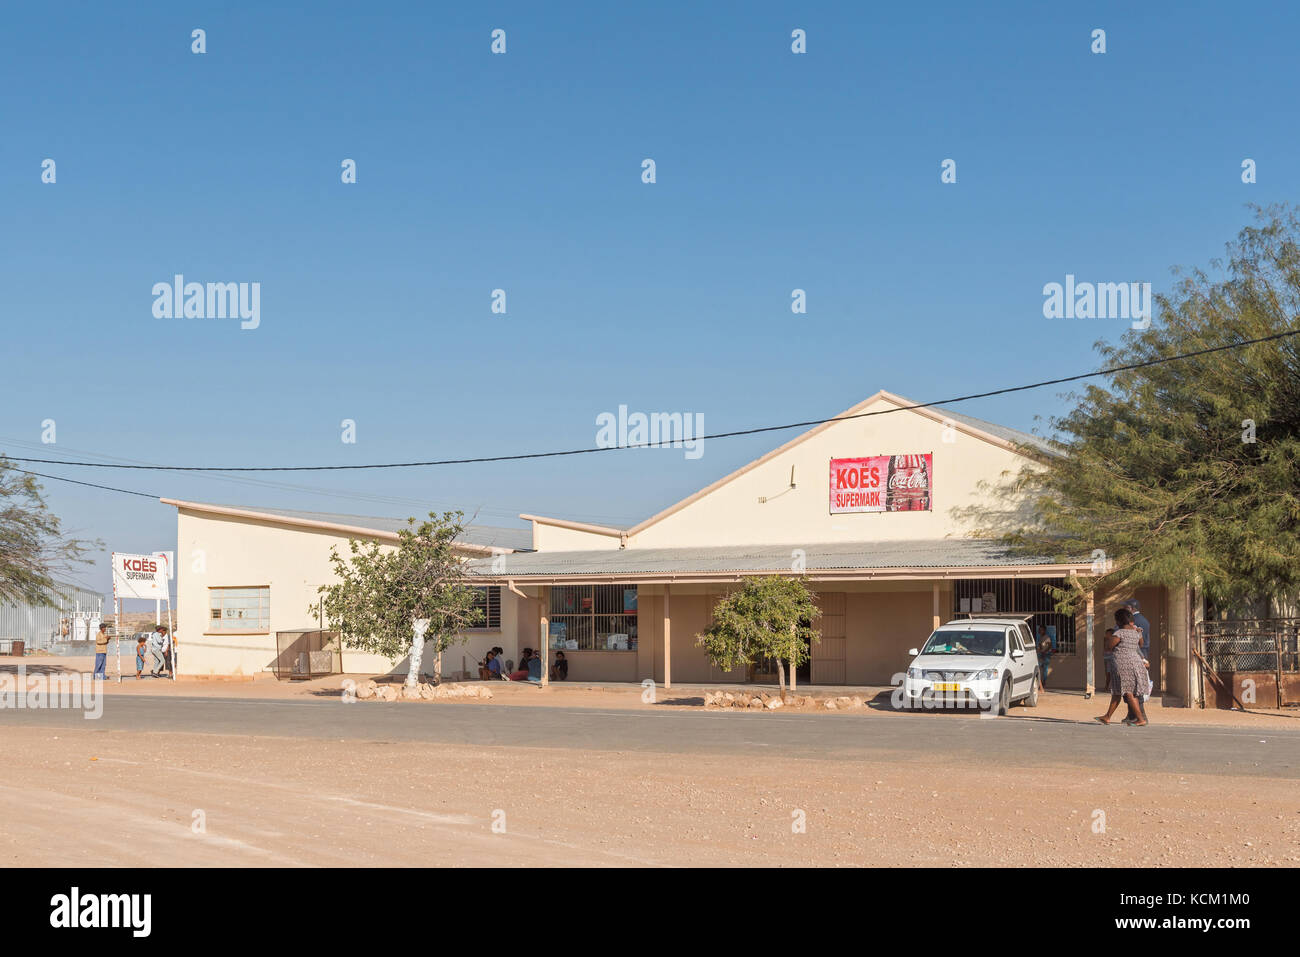 KOES - JULY 5, 2017: A street scene with a supermarket and people in Koes, a small town in the Karas Region in Namibia Stock Photo